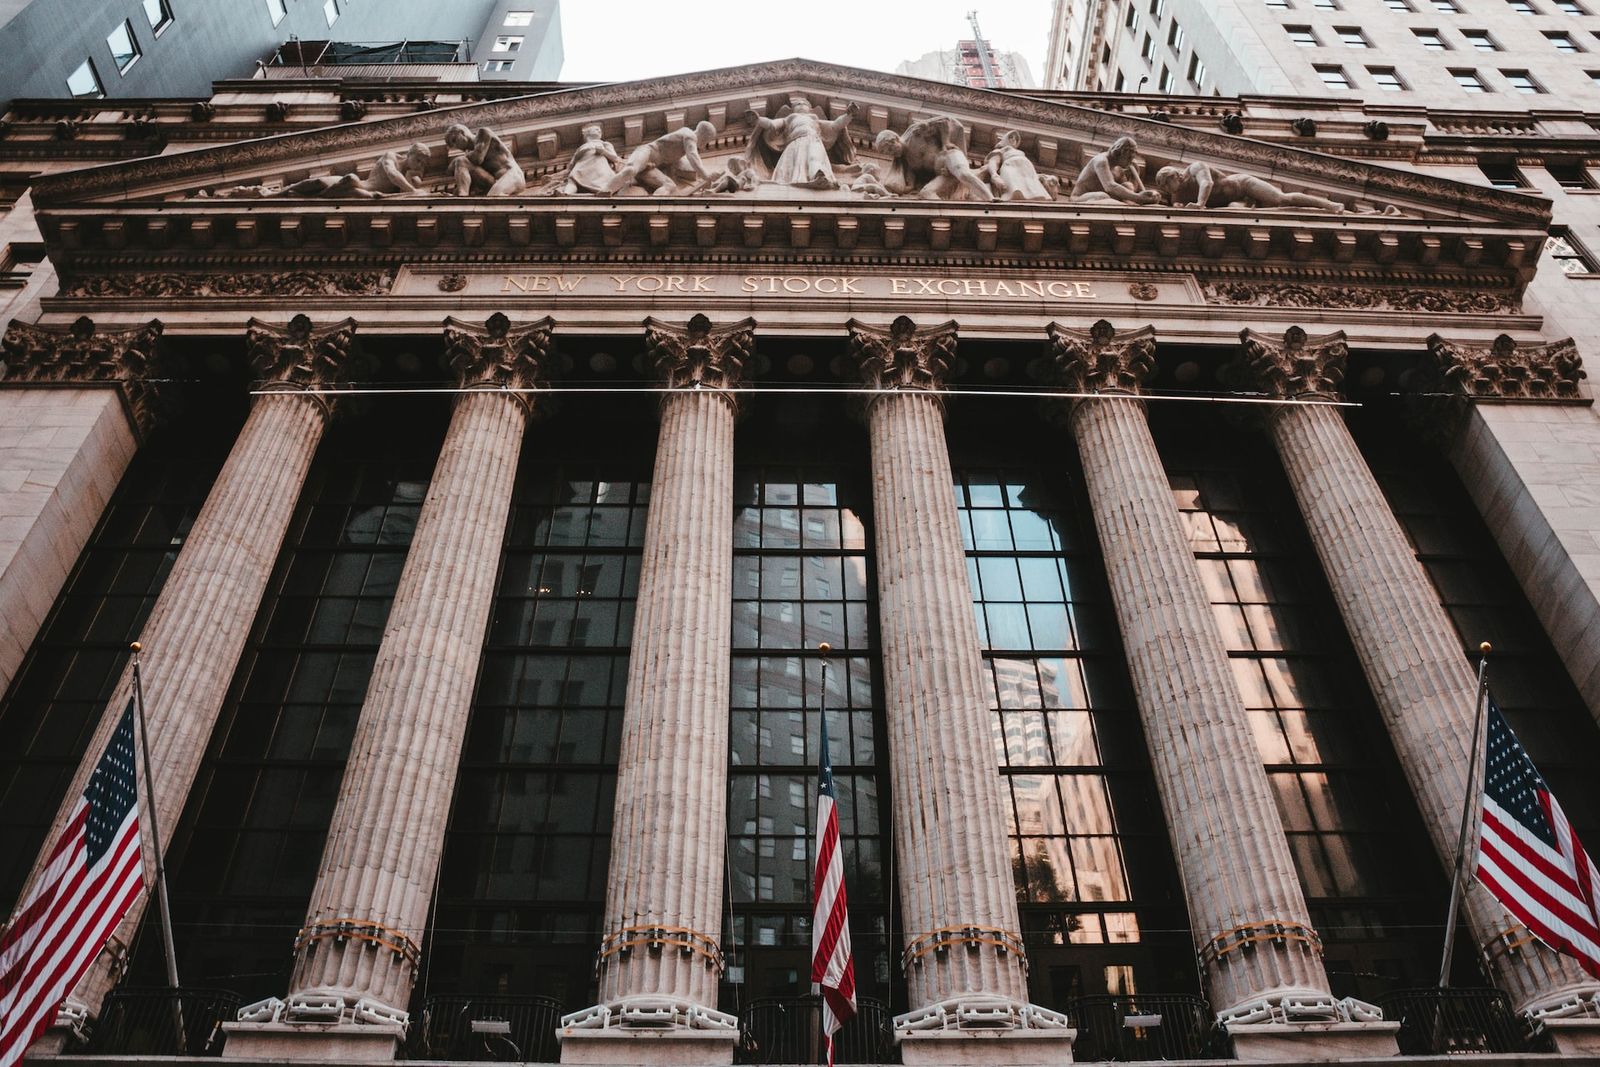 A close up image from New York Stock Exchange